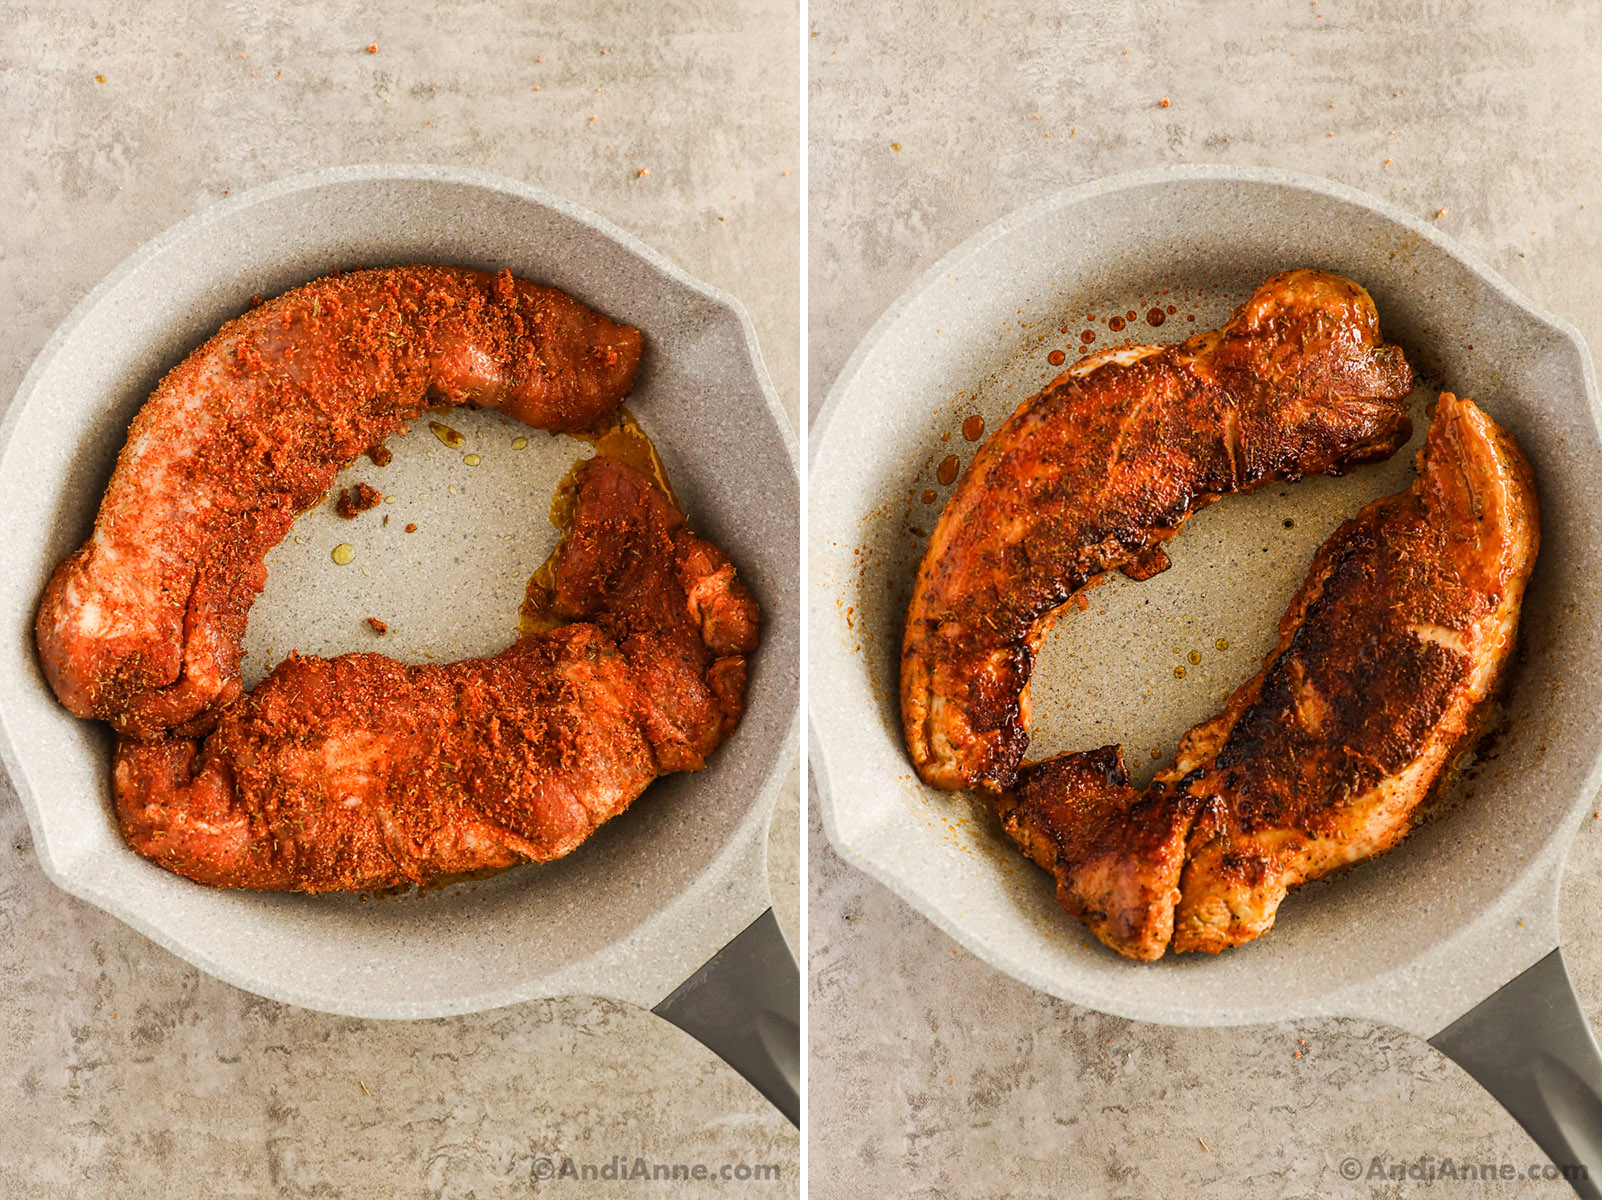 Two images of pork tenderloin in a frying pan. First is raw covered in spice rub. Second is seared covered in spice rub.